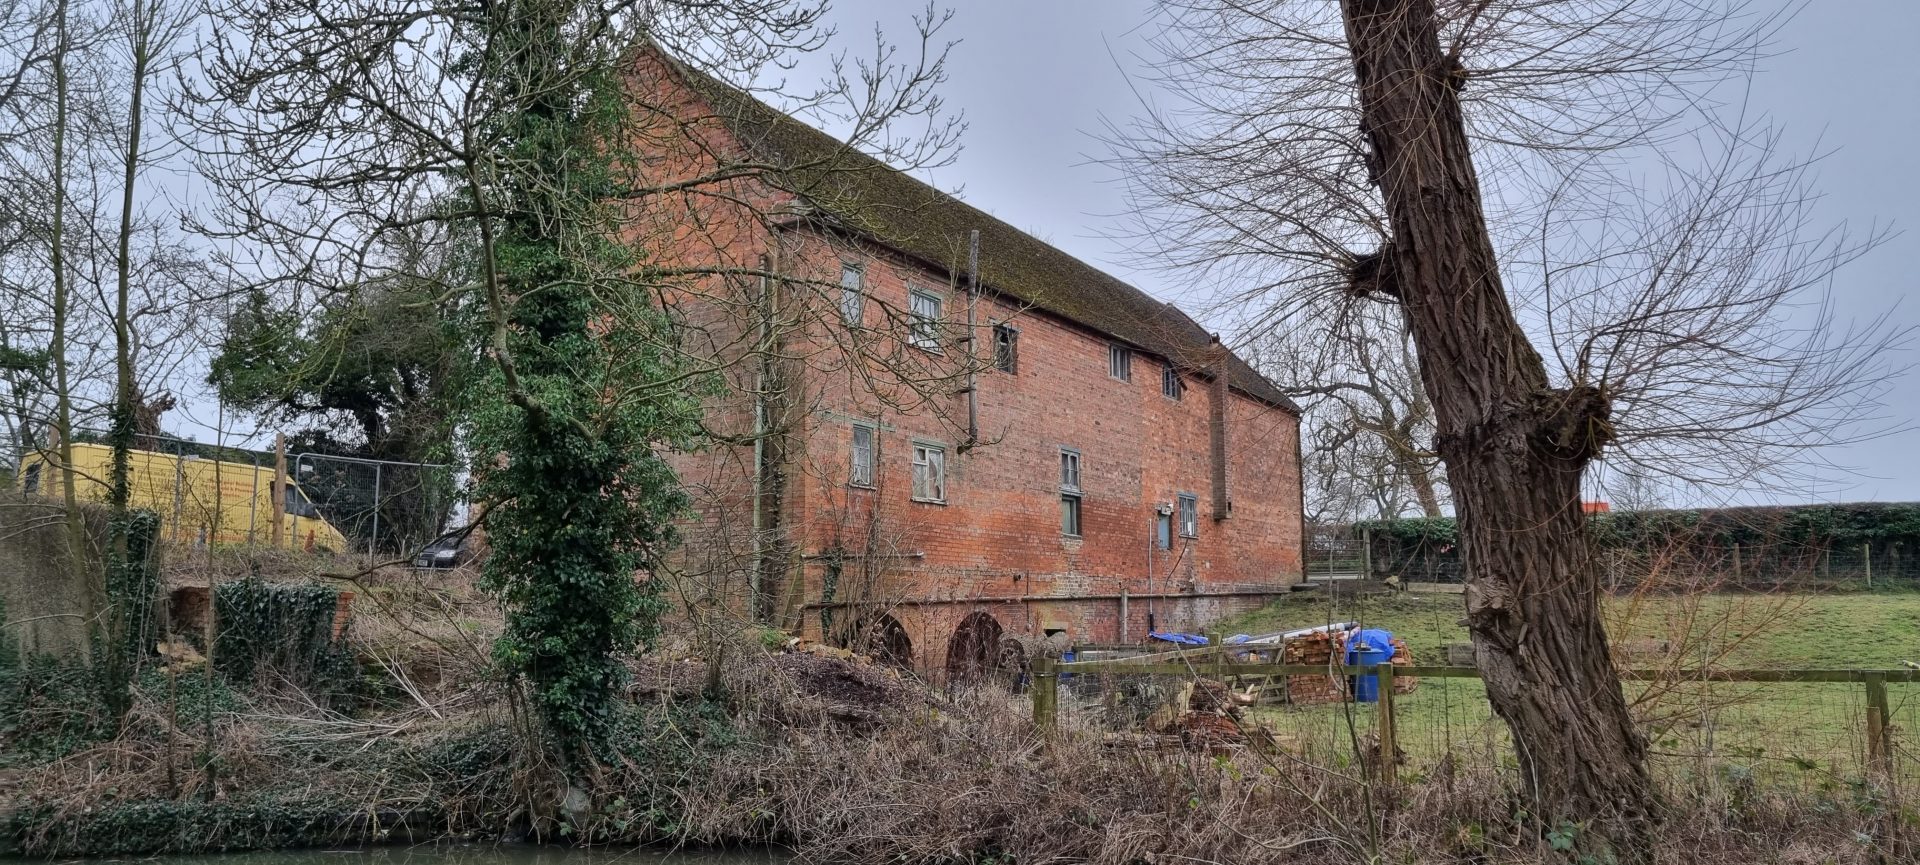 Old Mill building, Cropredy